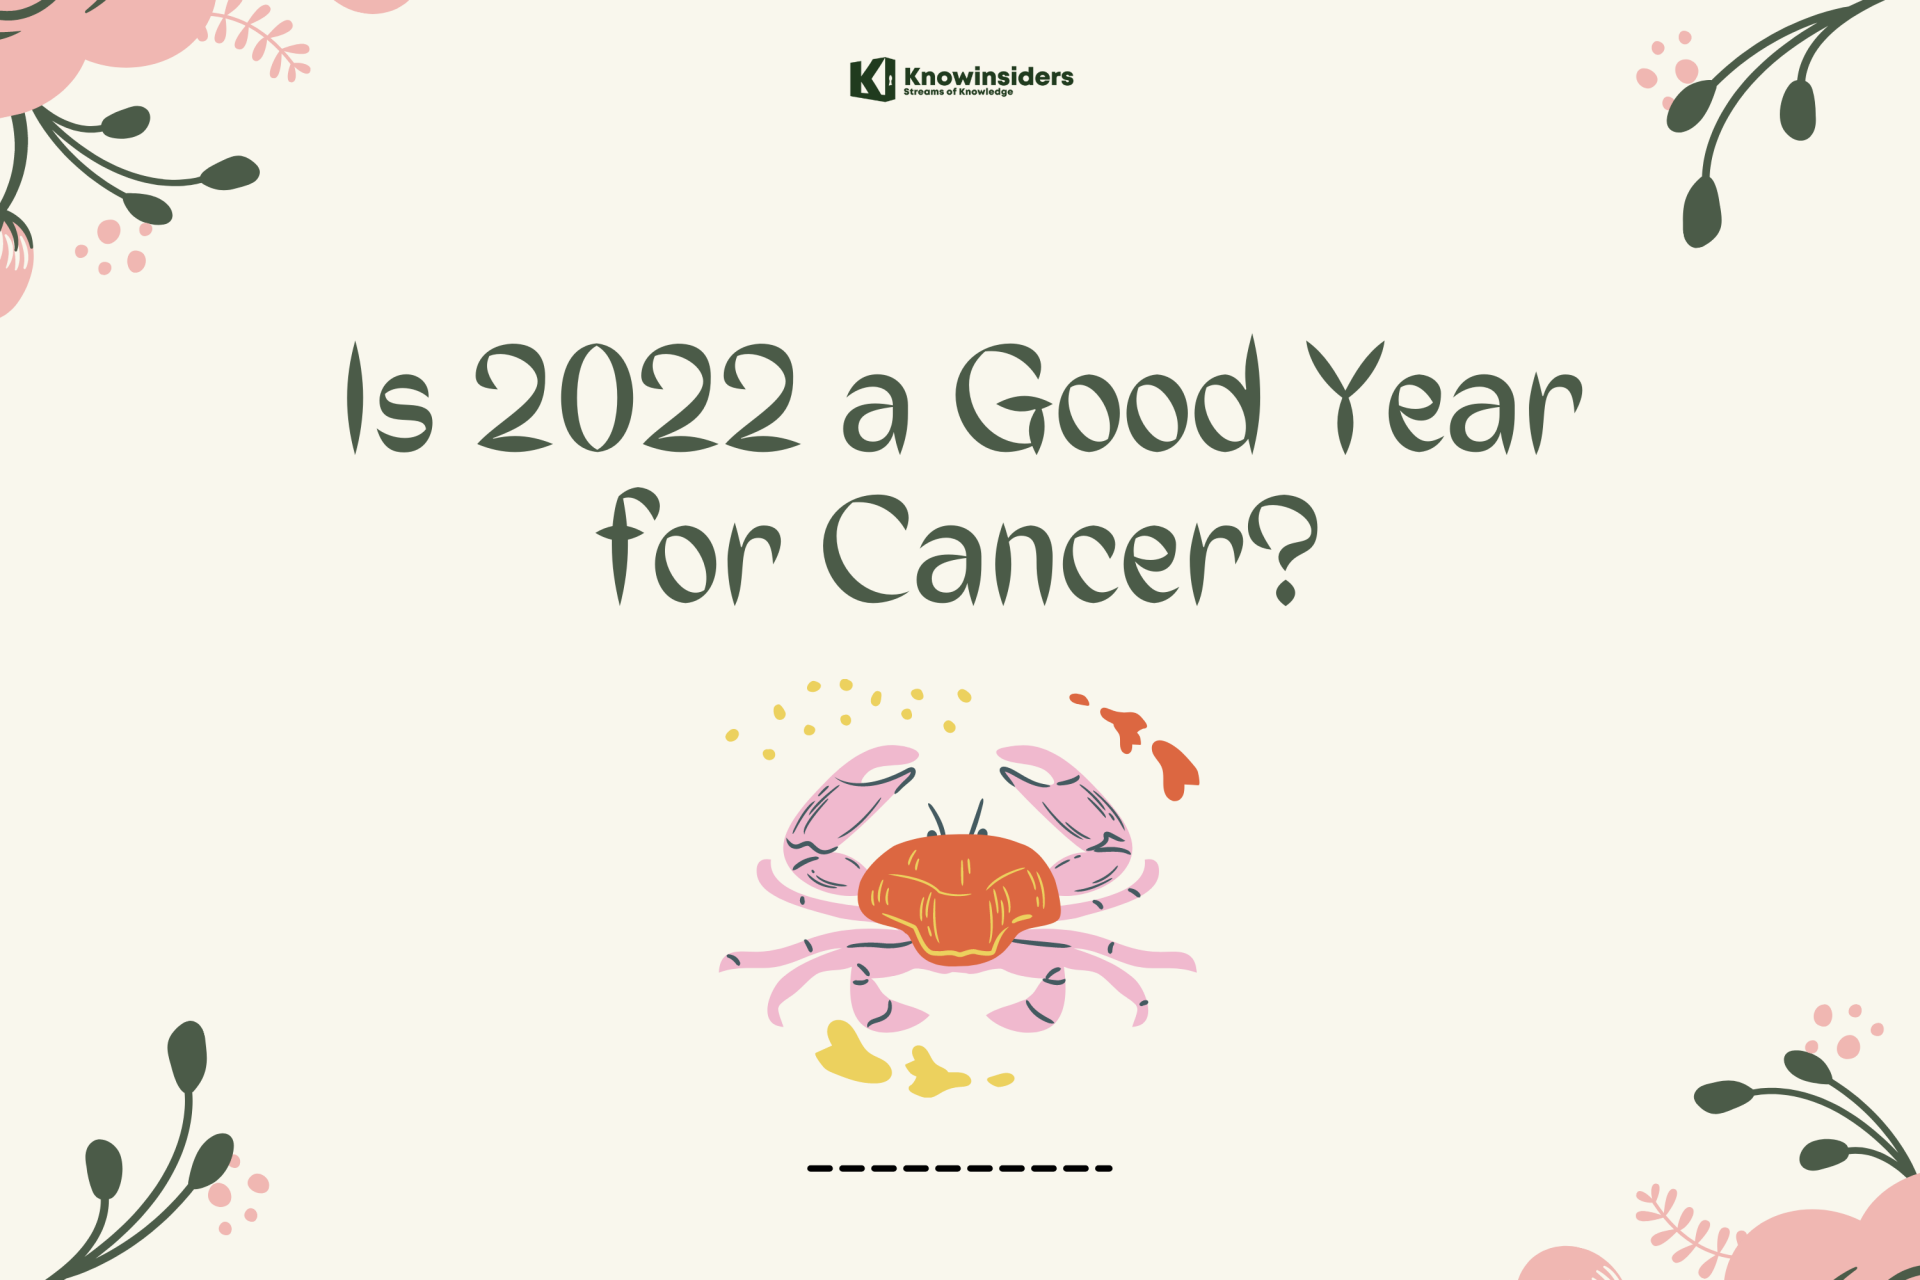 Is 2022 a Good Year for Cancer?